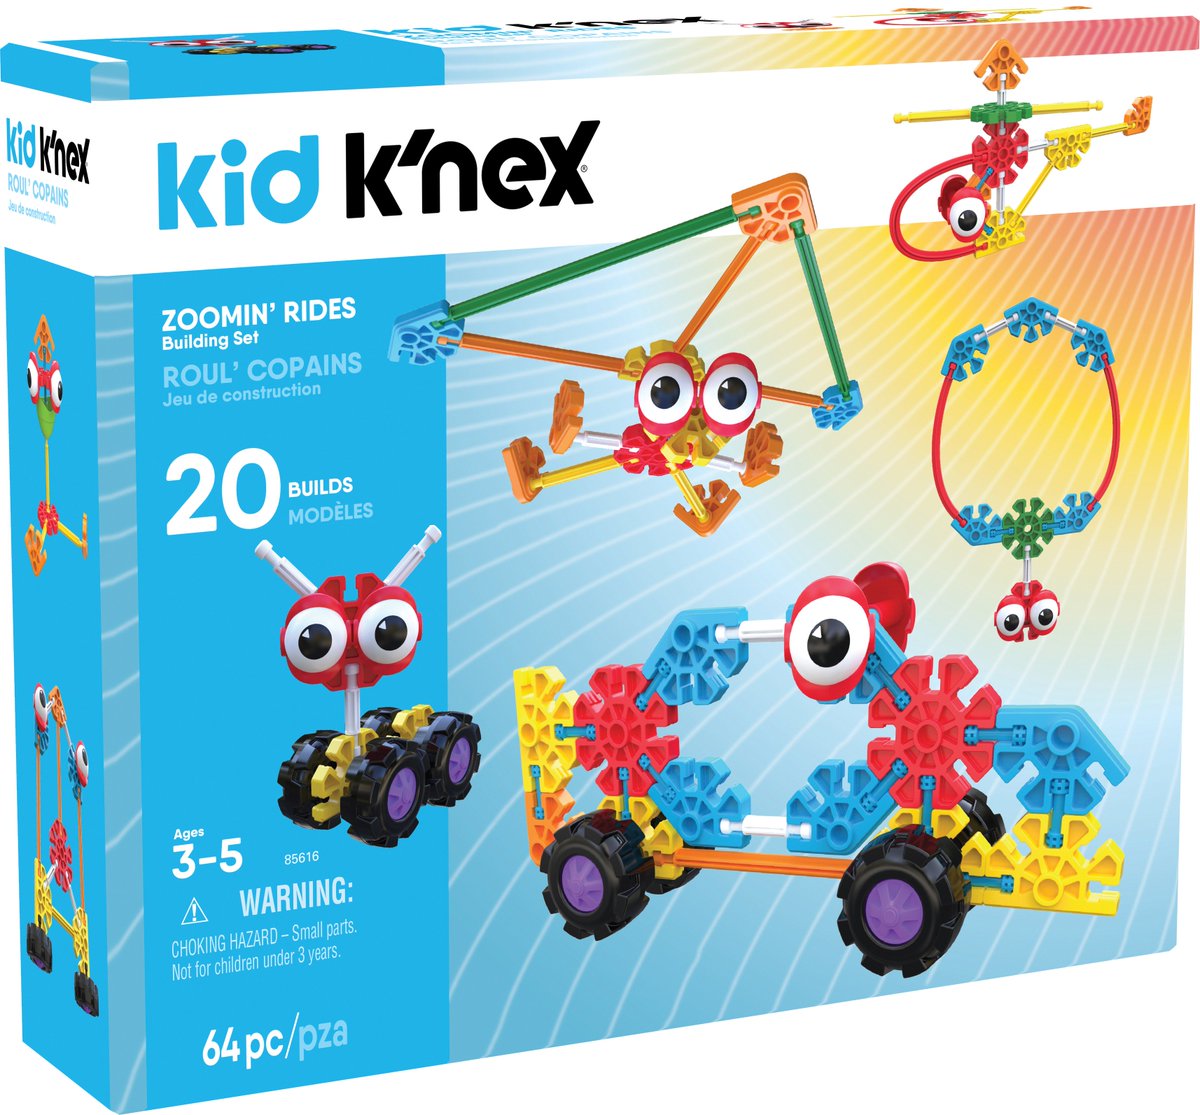 #Congrats to #KNEXmas winner @Adamsheppard140 - you've won an awesome KID K'NEX Zoomin Rides Building Set! Please DM us with your postal address so we can send your prize!